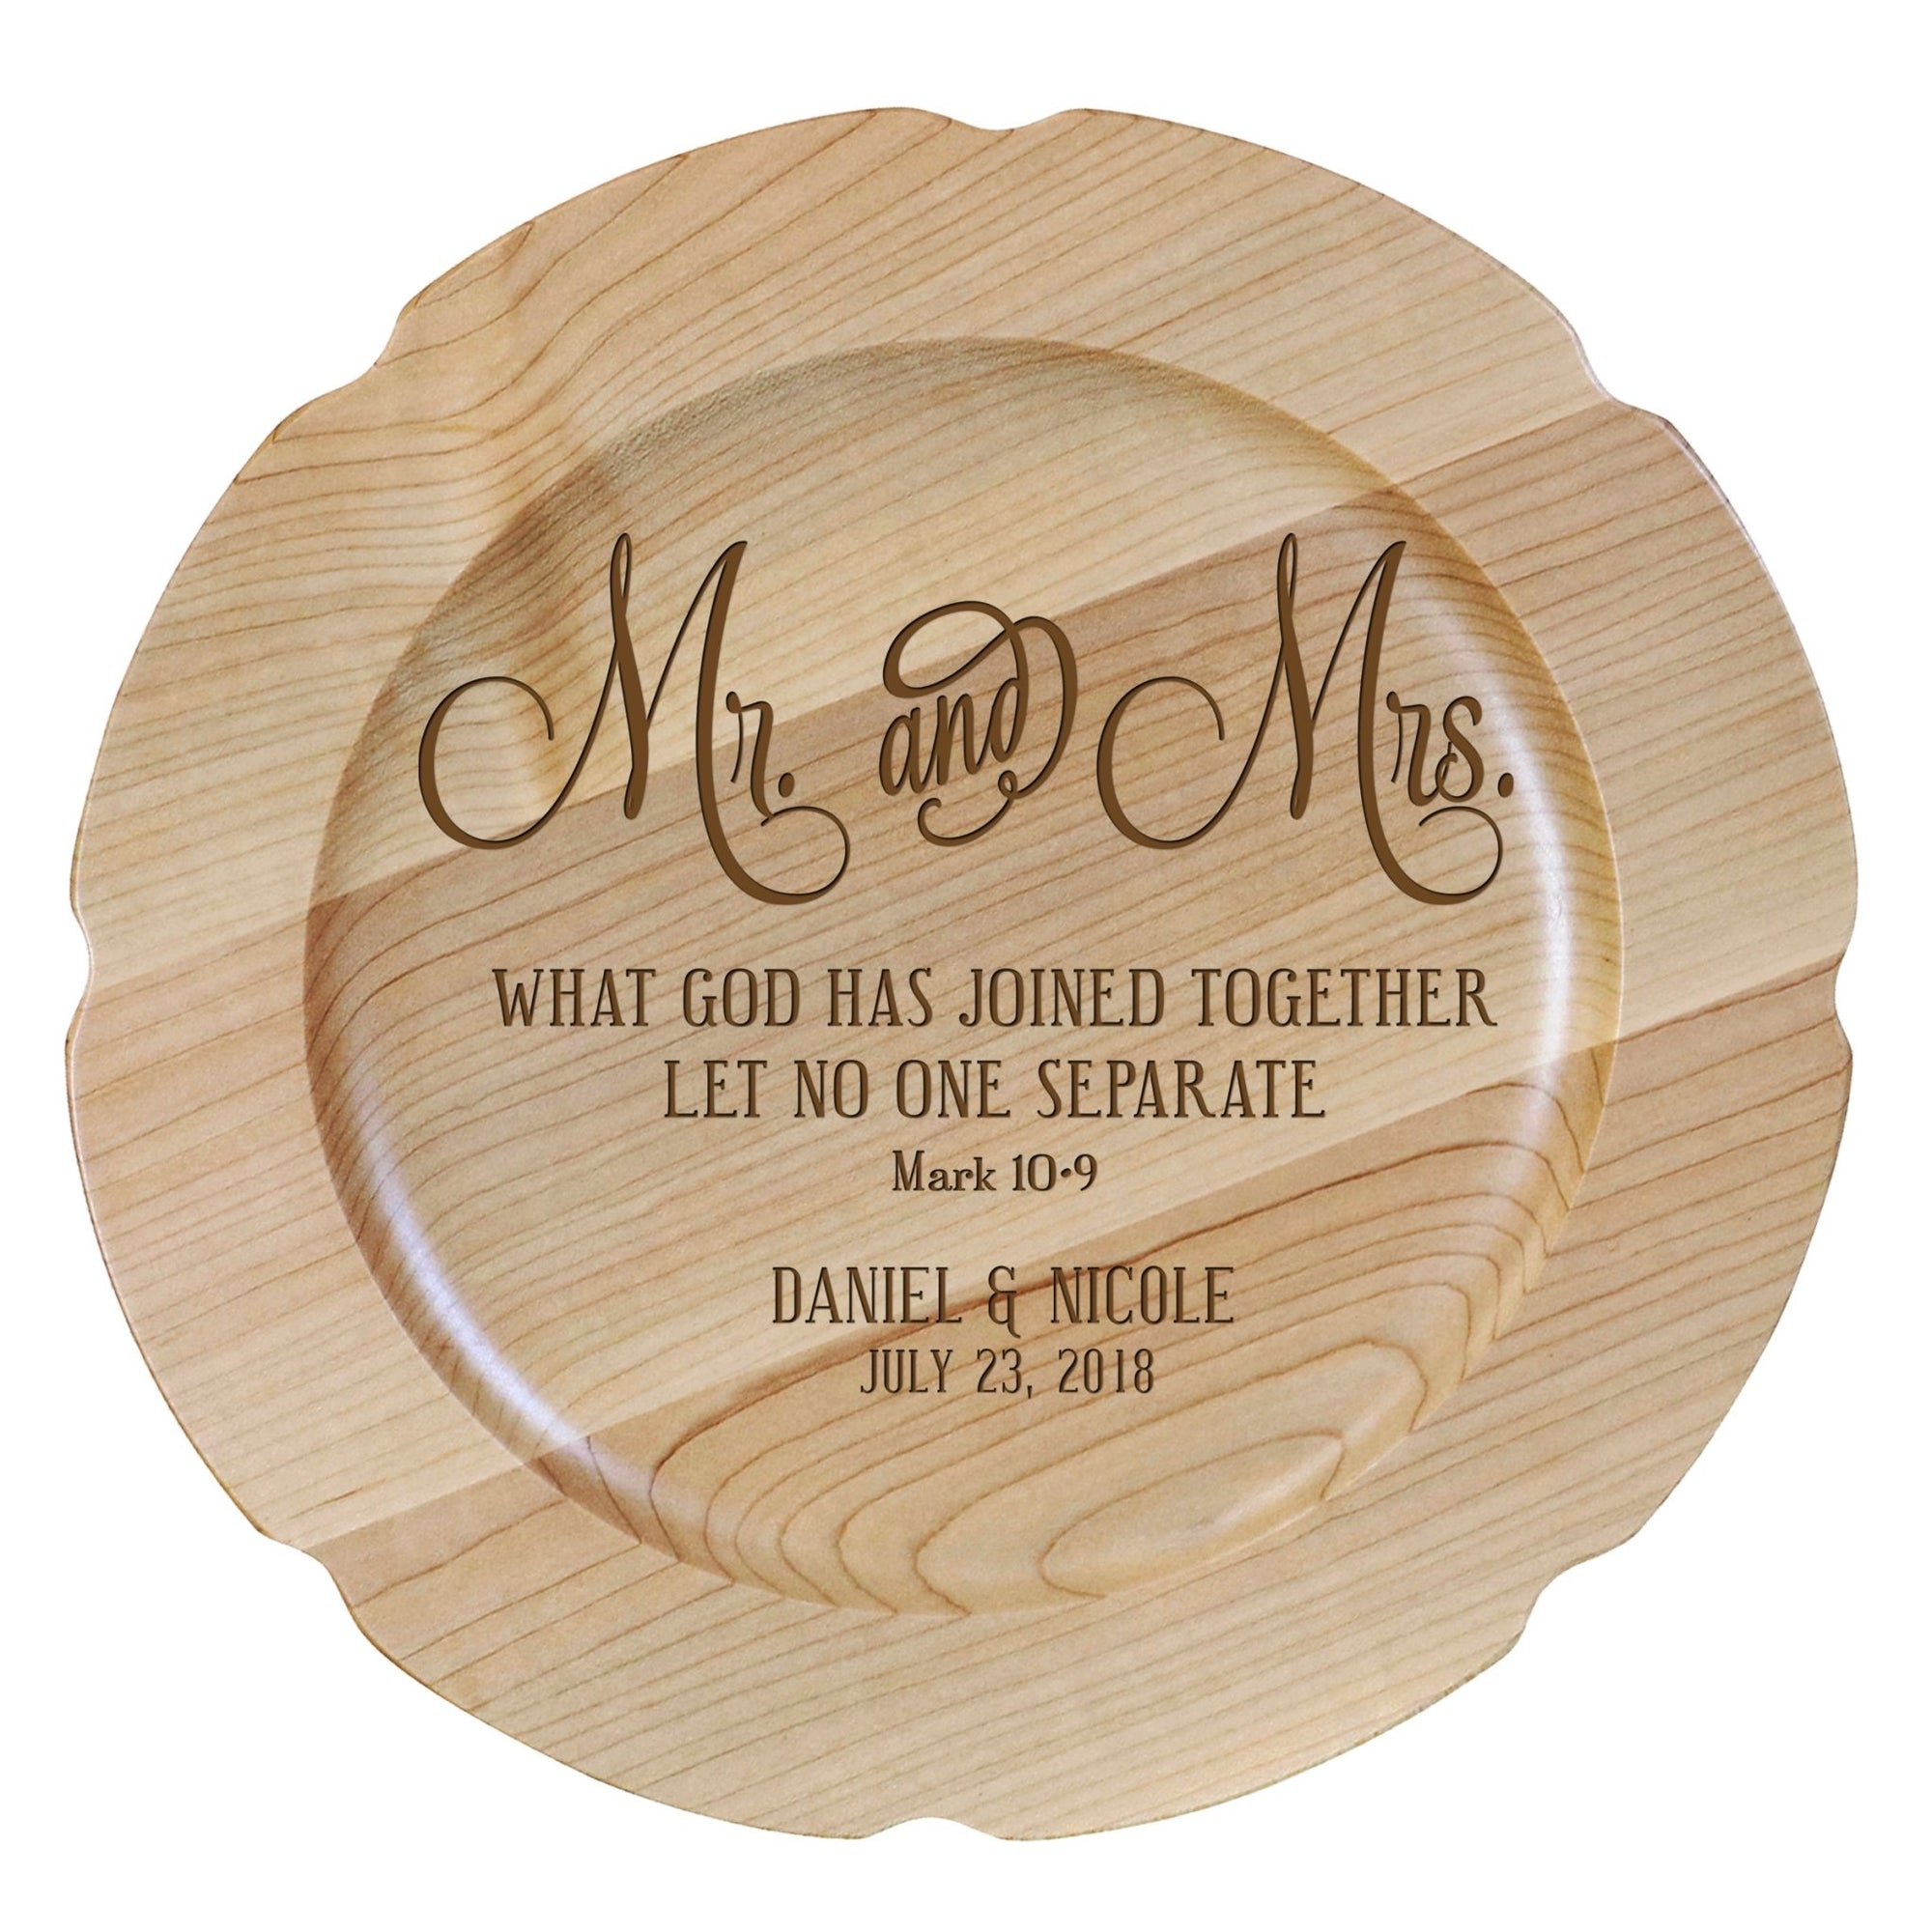 Personalized Inspirational Plates With Quotes - Mr. and Mrs. - LifeSong Milestones